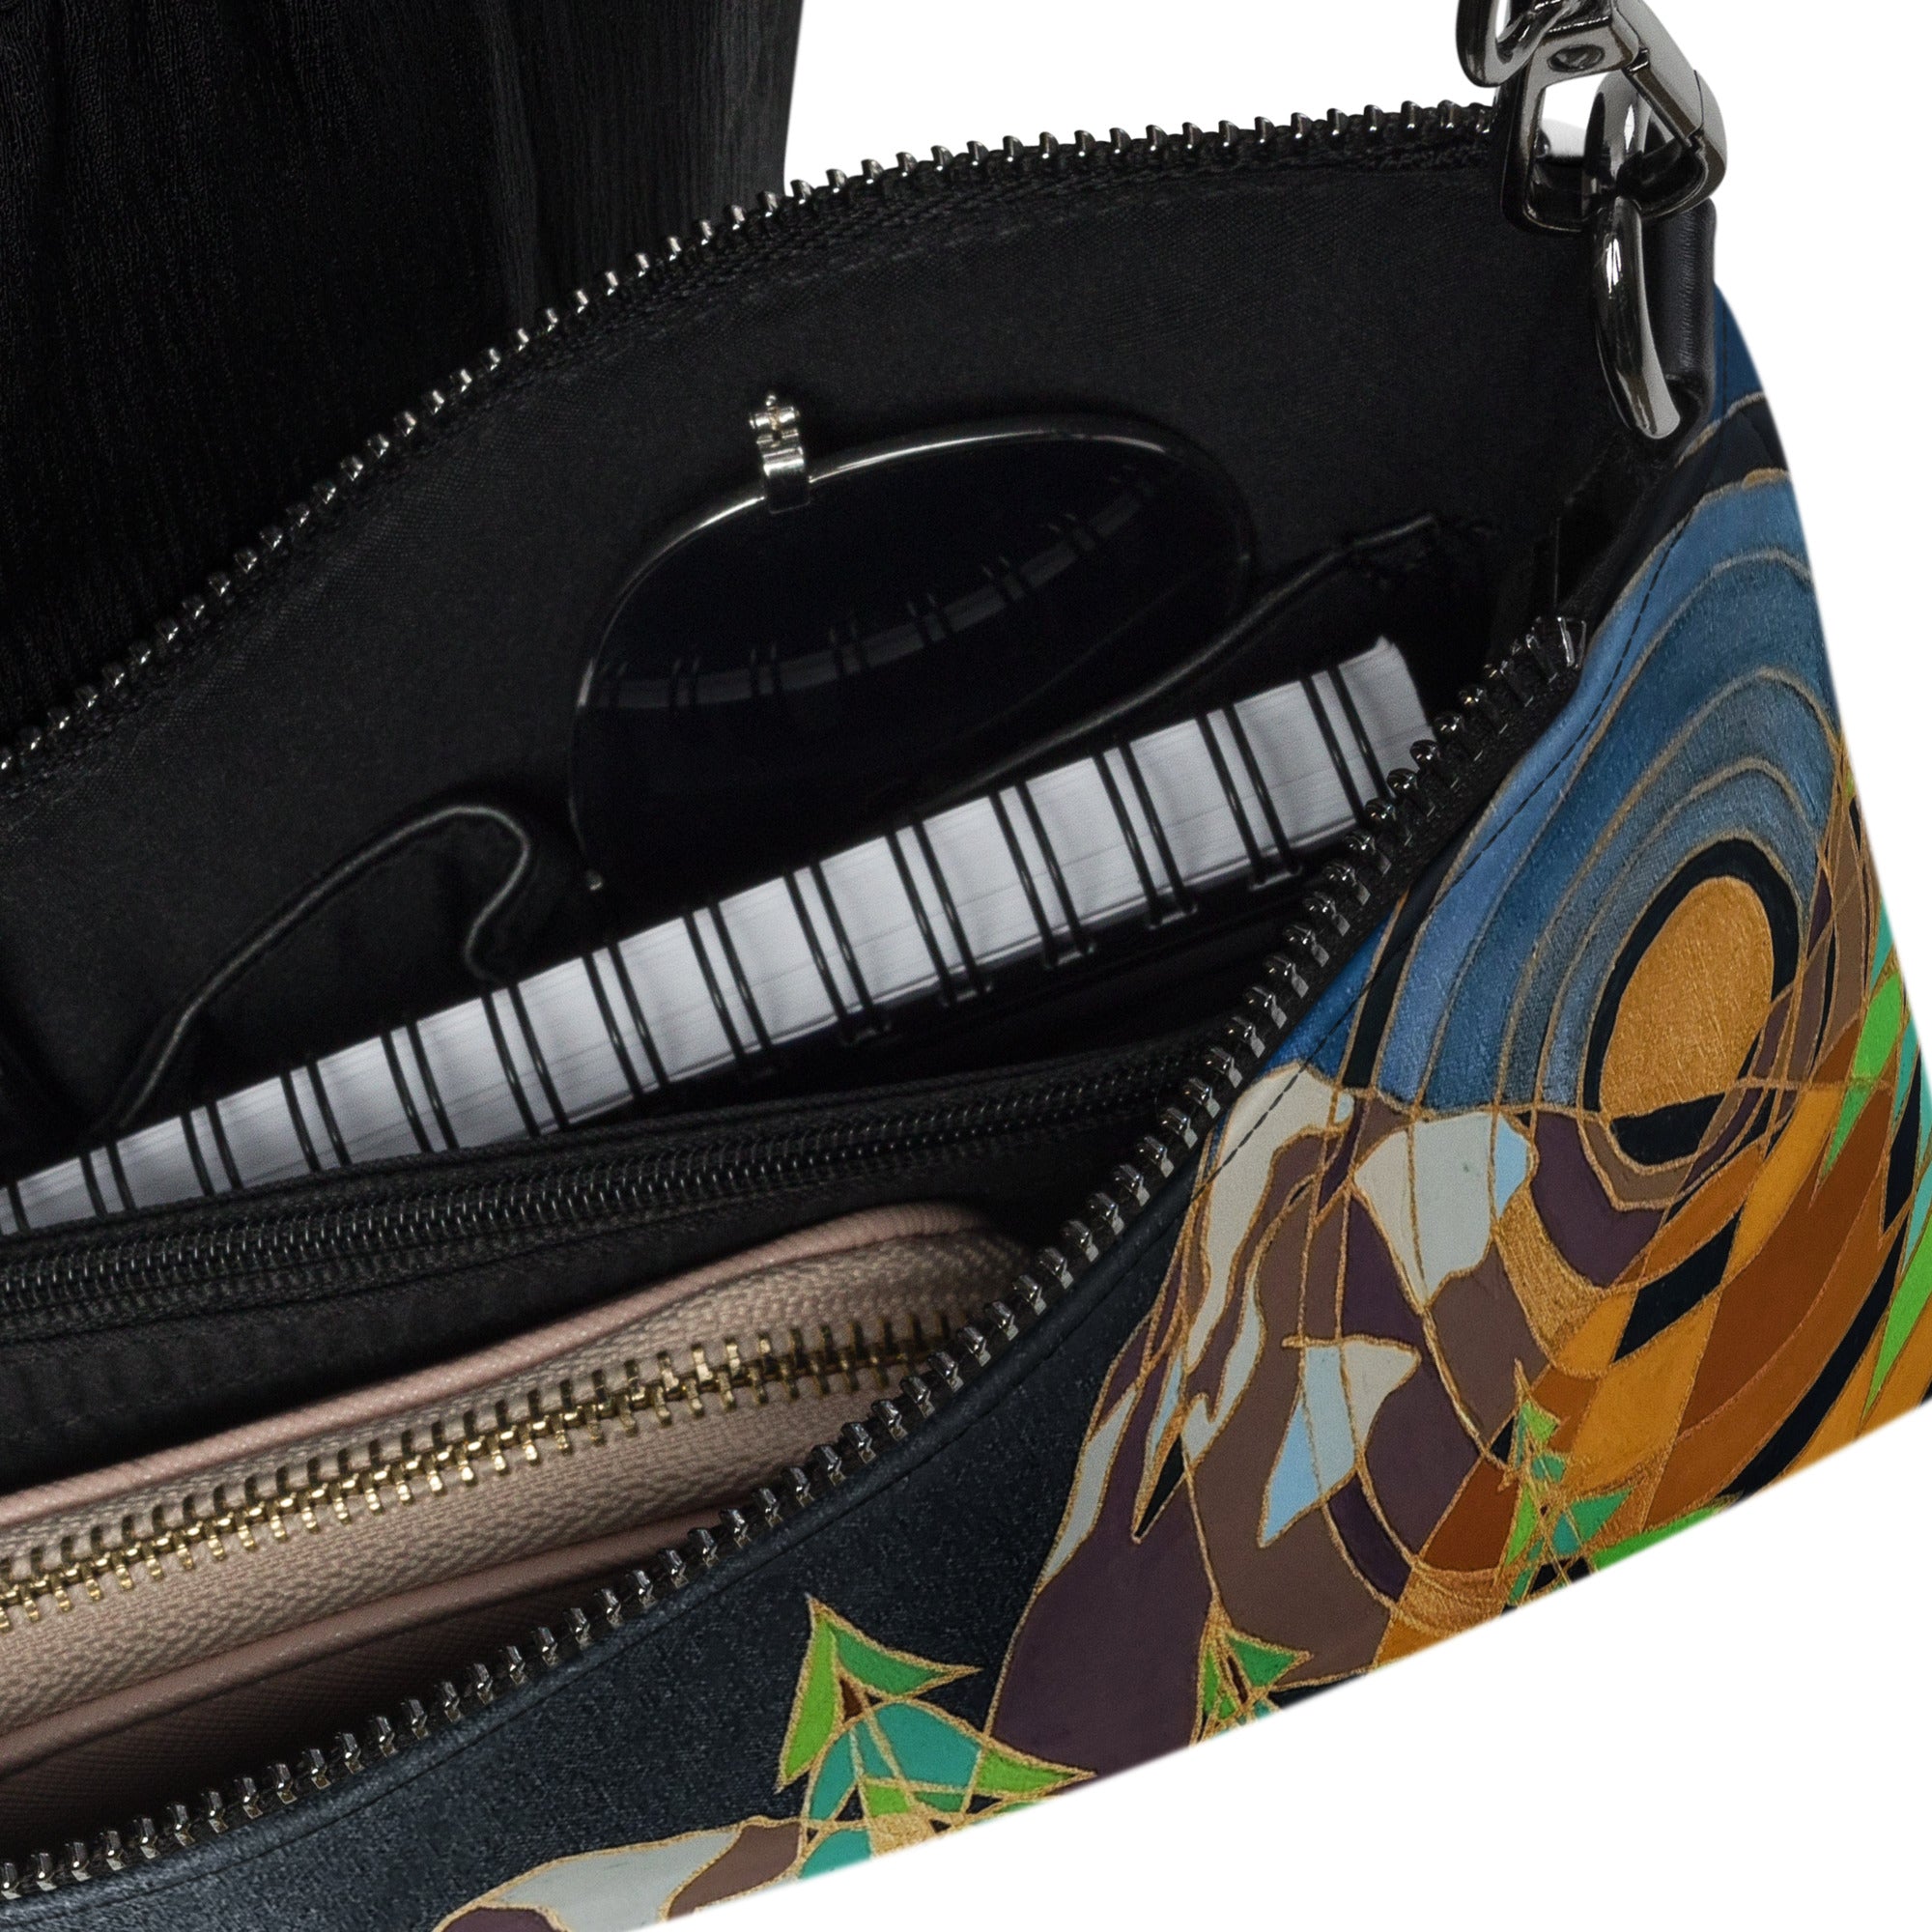 Artistic Bags and Purses: Beautifully Disordered Collection